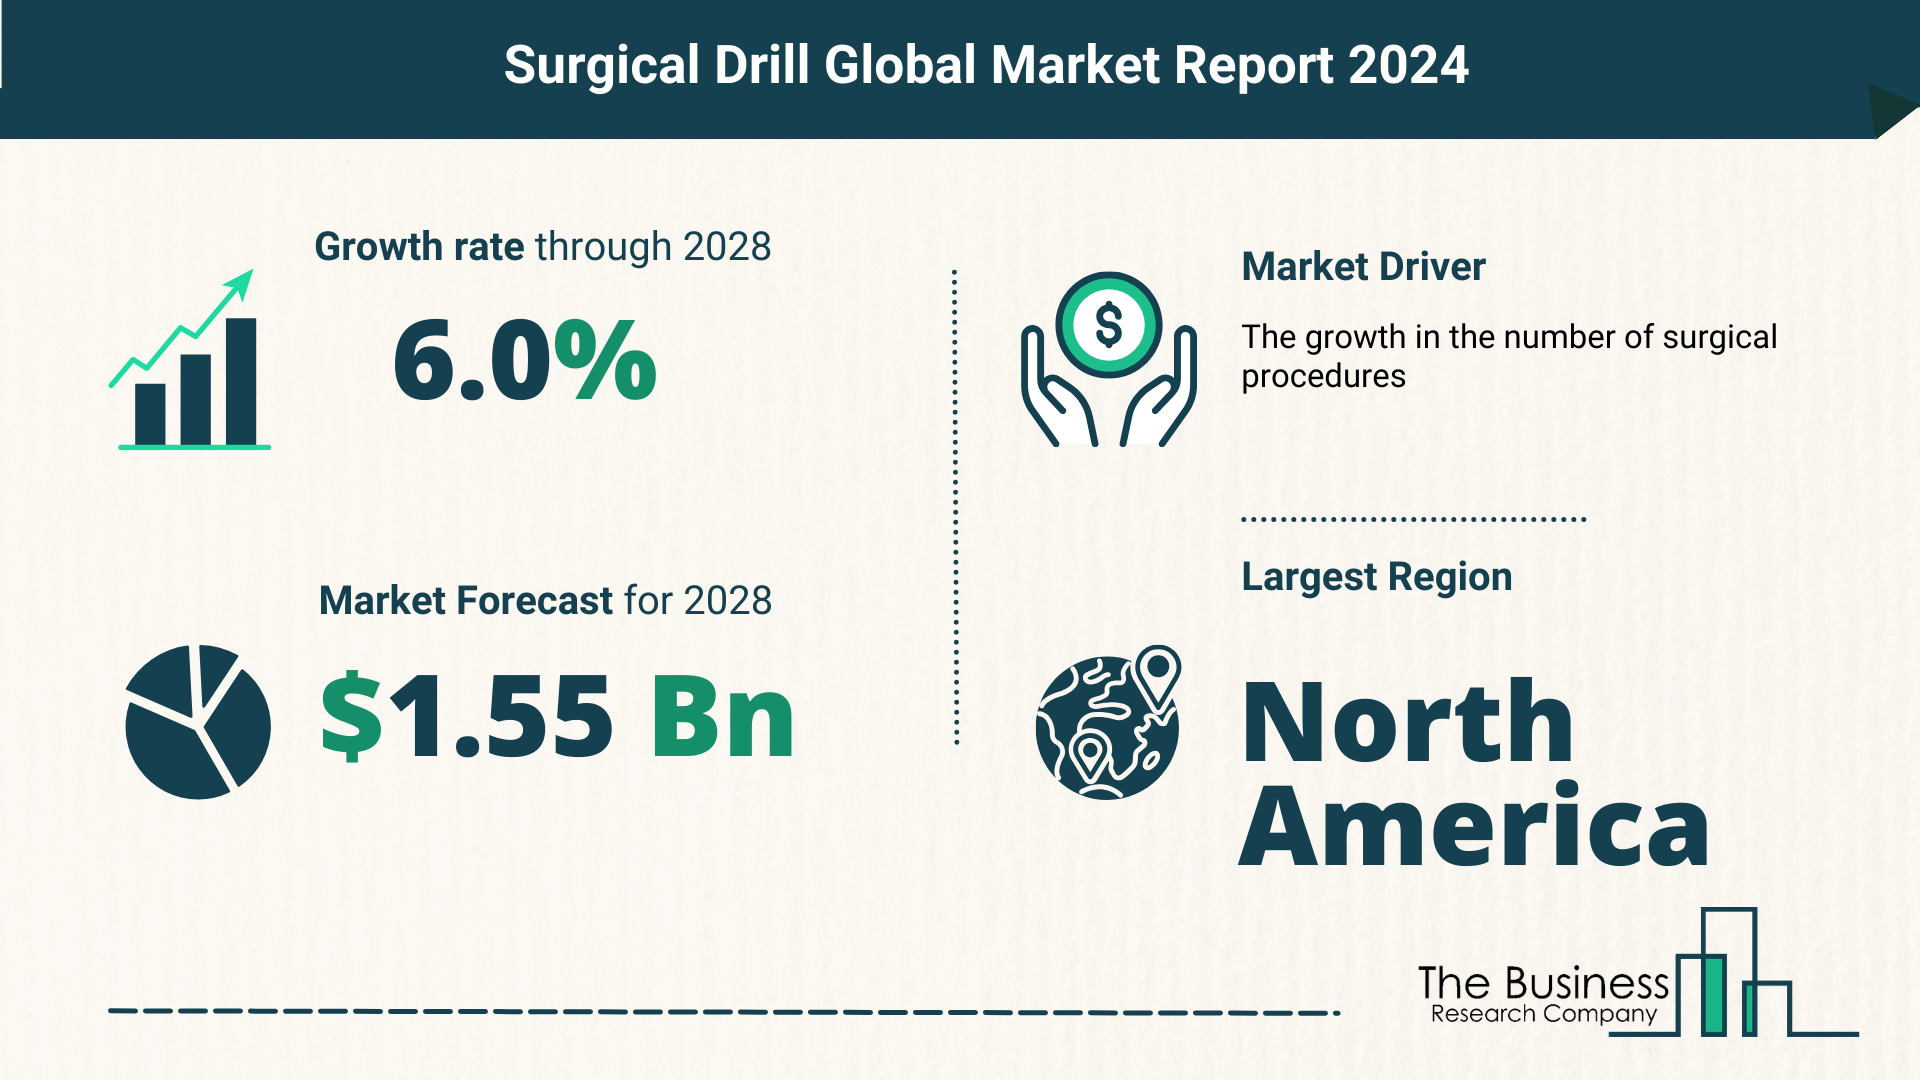 Key Takeaways From The Global Surgical Drill Market Forecast 2024